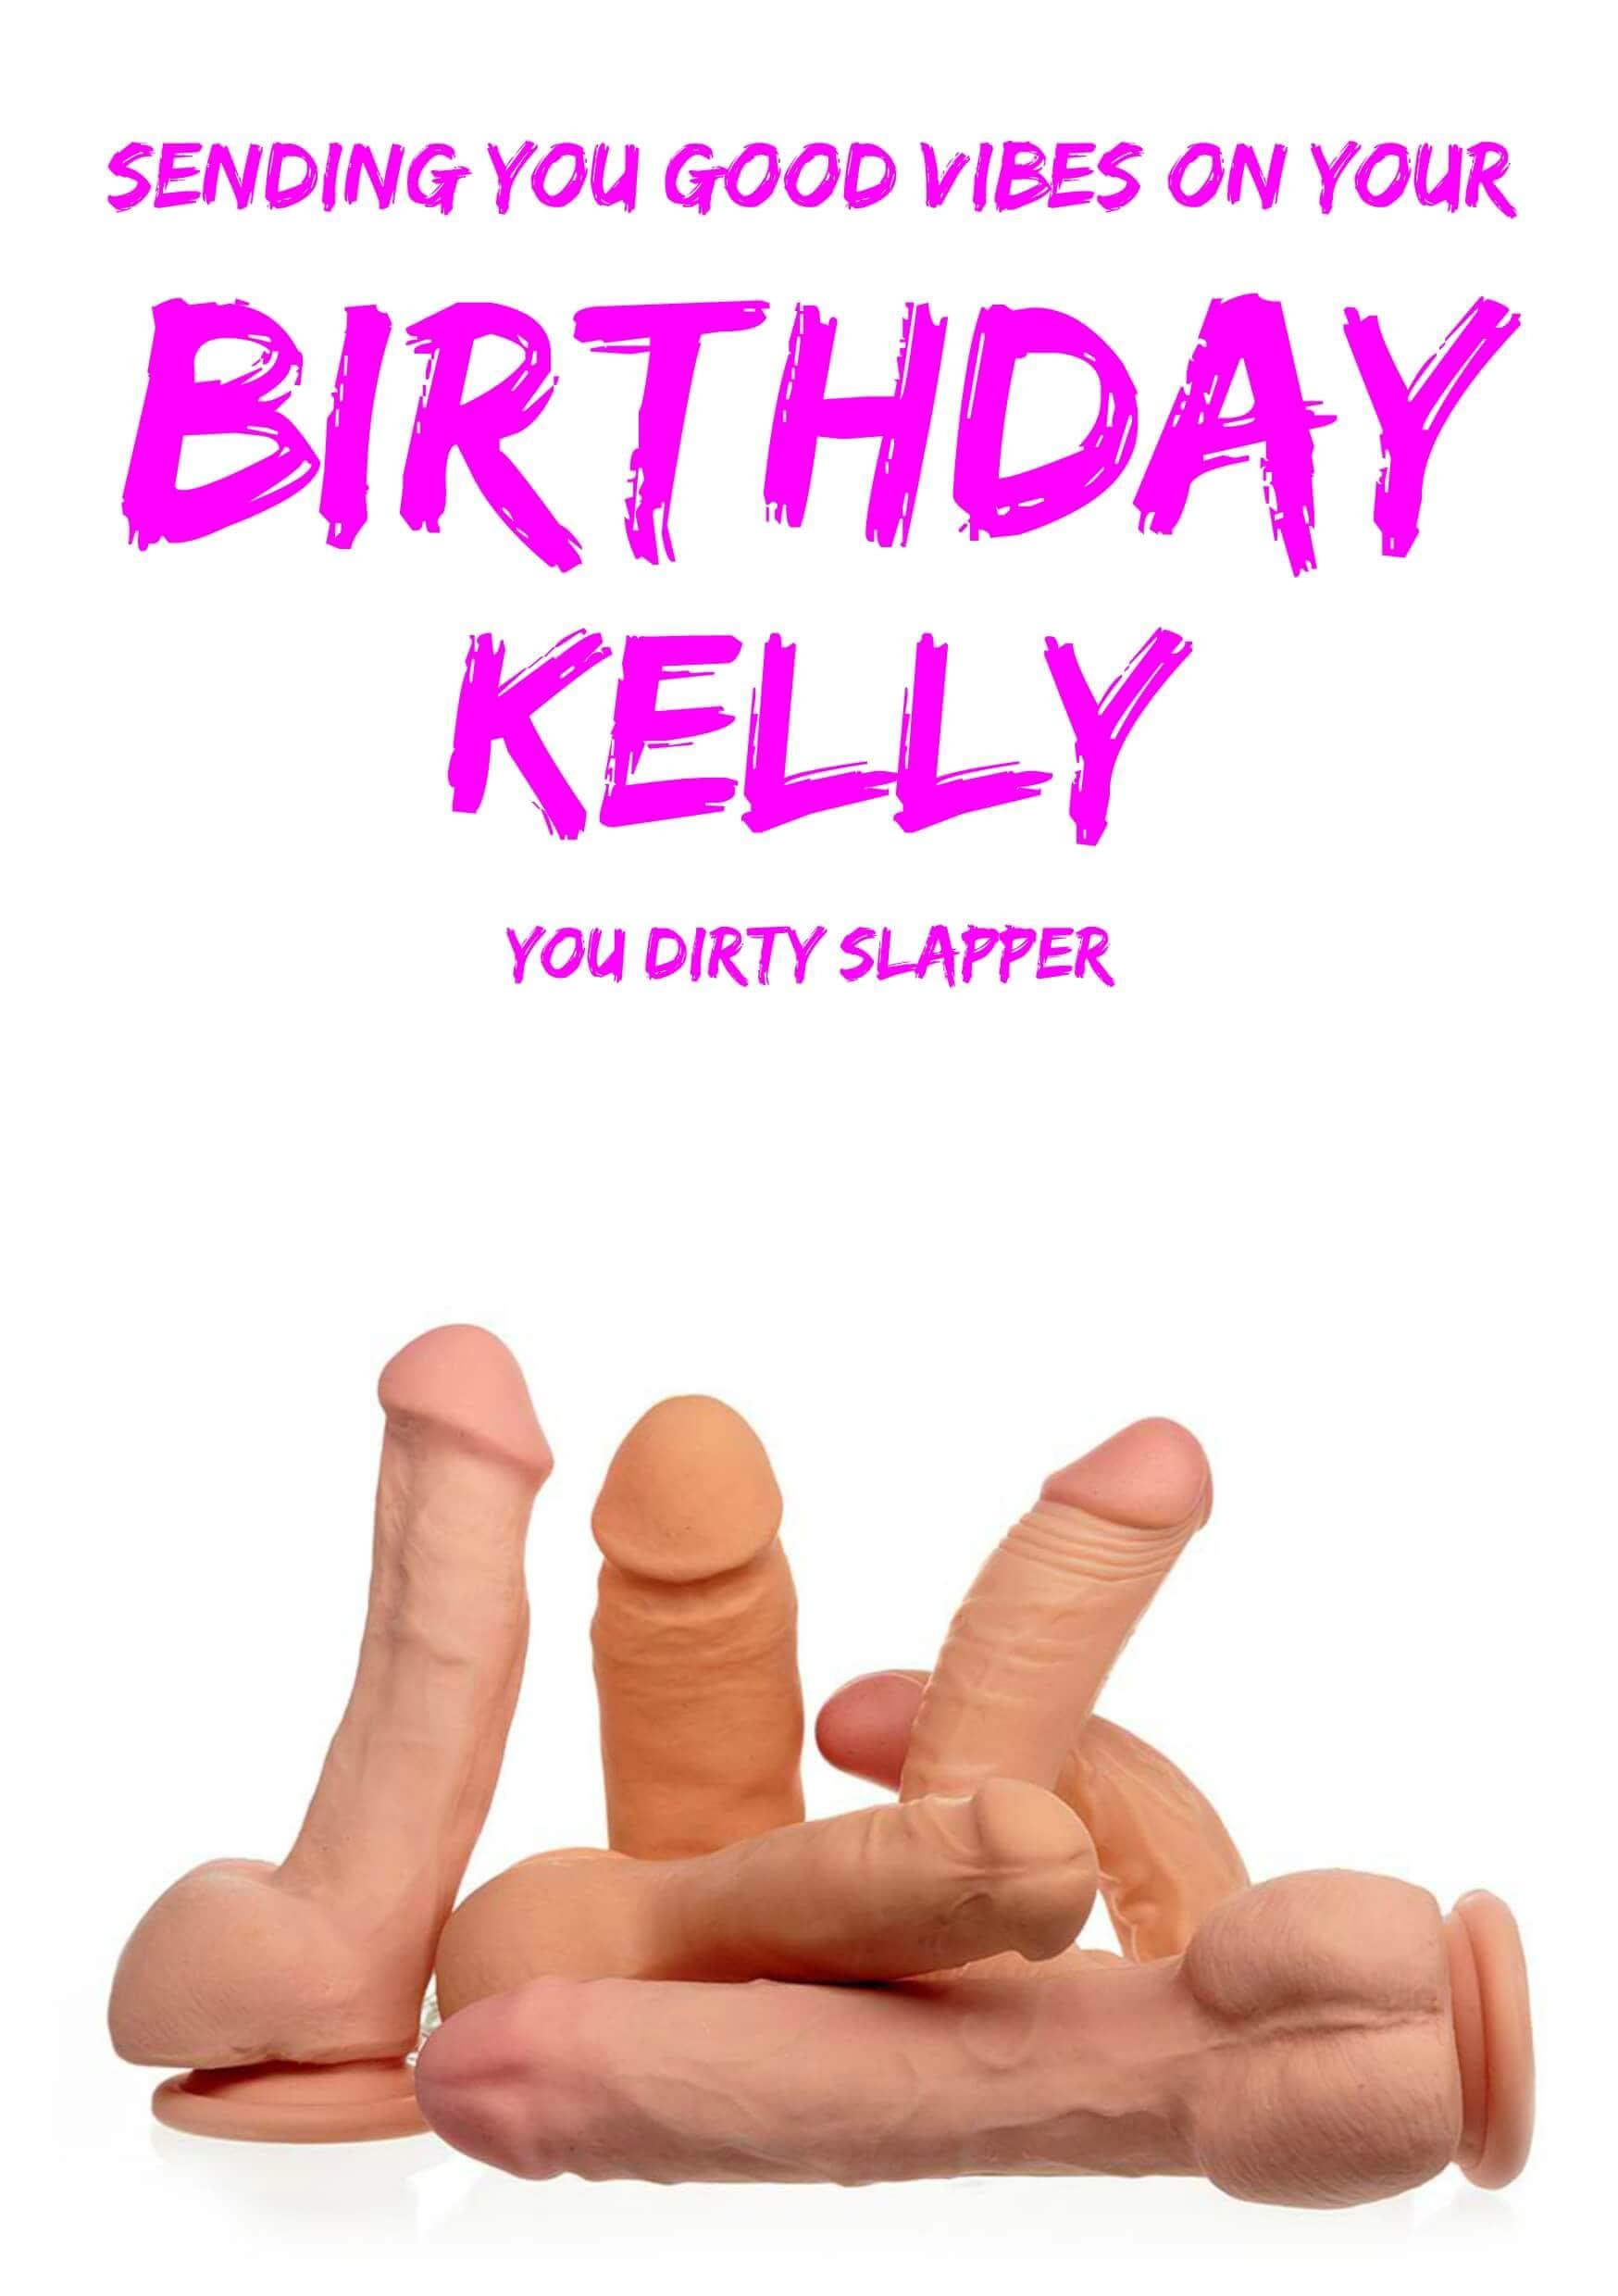 A Slapper Kelly birthday greeting card with the words "sending vibes" to celebrate your birthday, Kelly from Twisted Gifts.